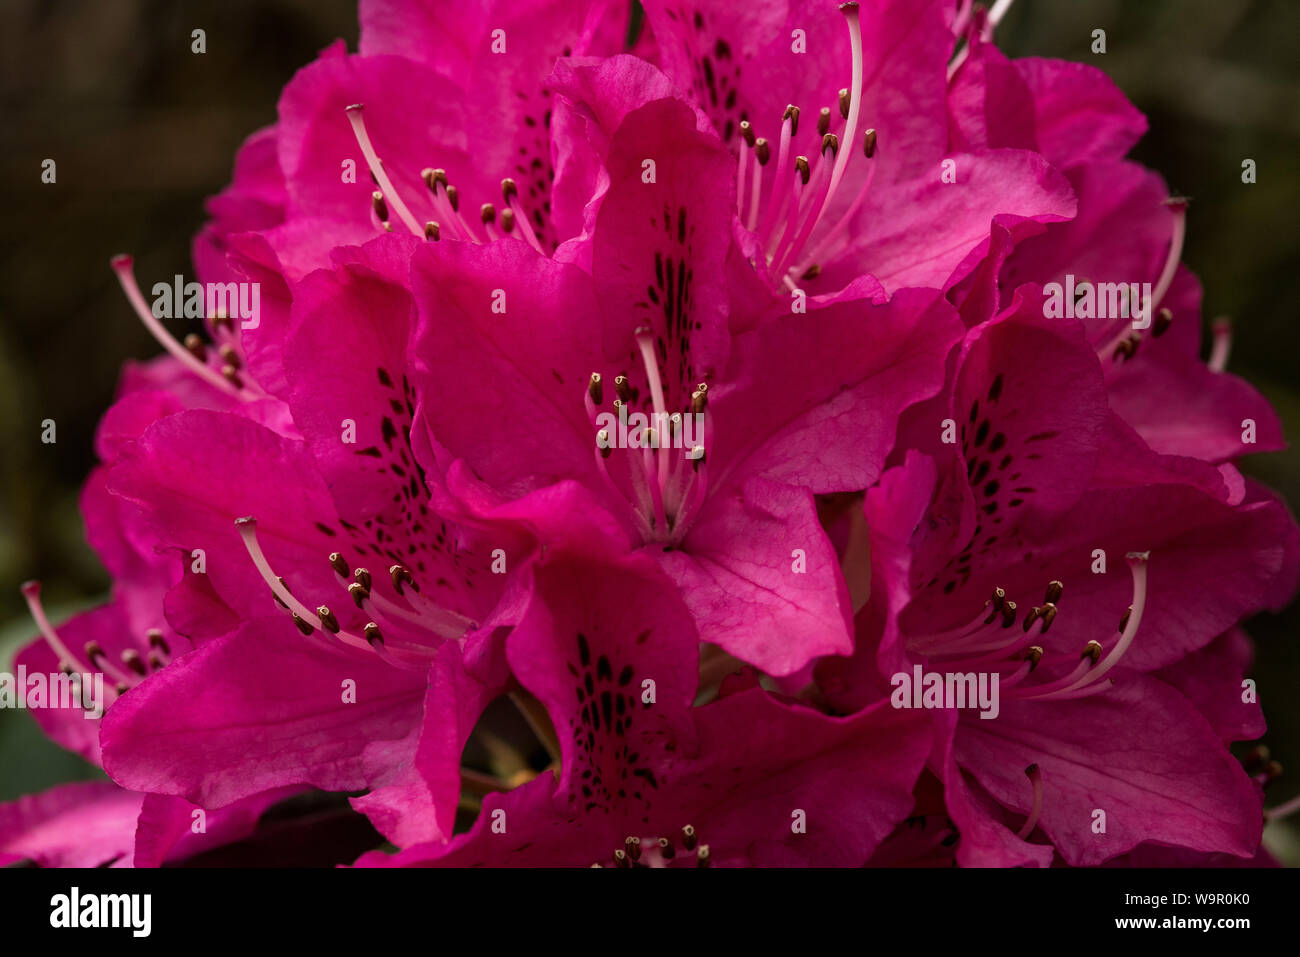 Dark pink / cerise rhododendrons with almost black spotted markings. Stock Photo